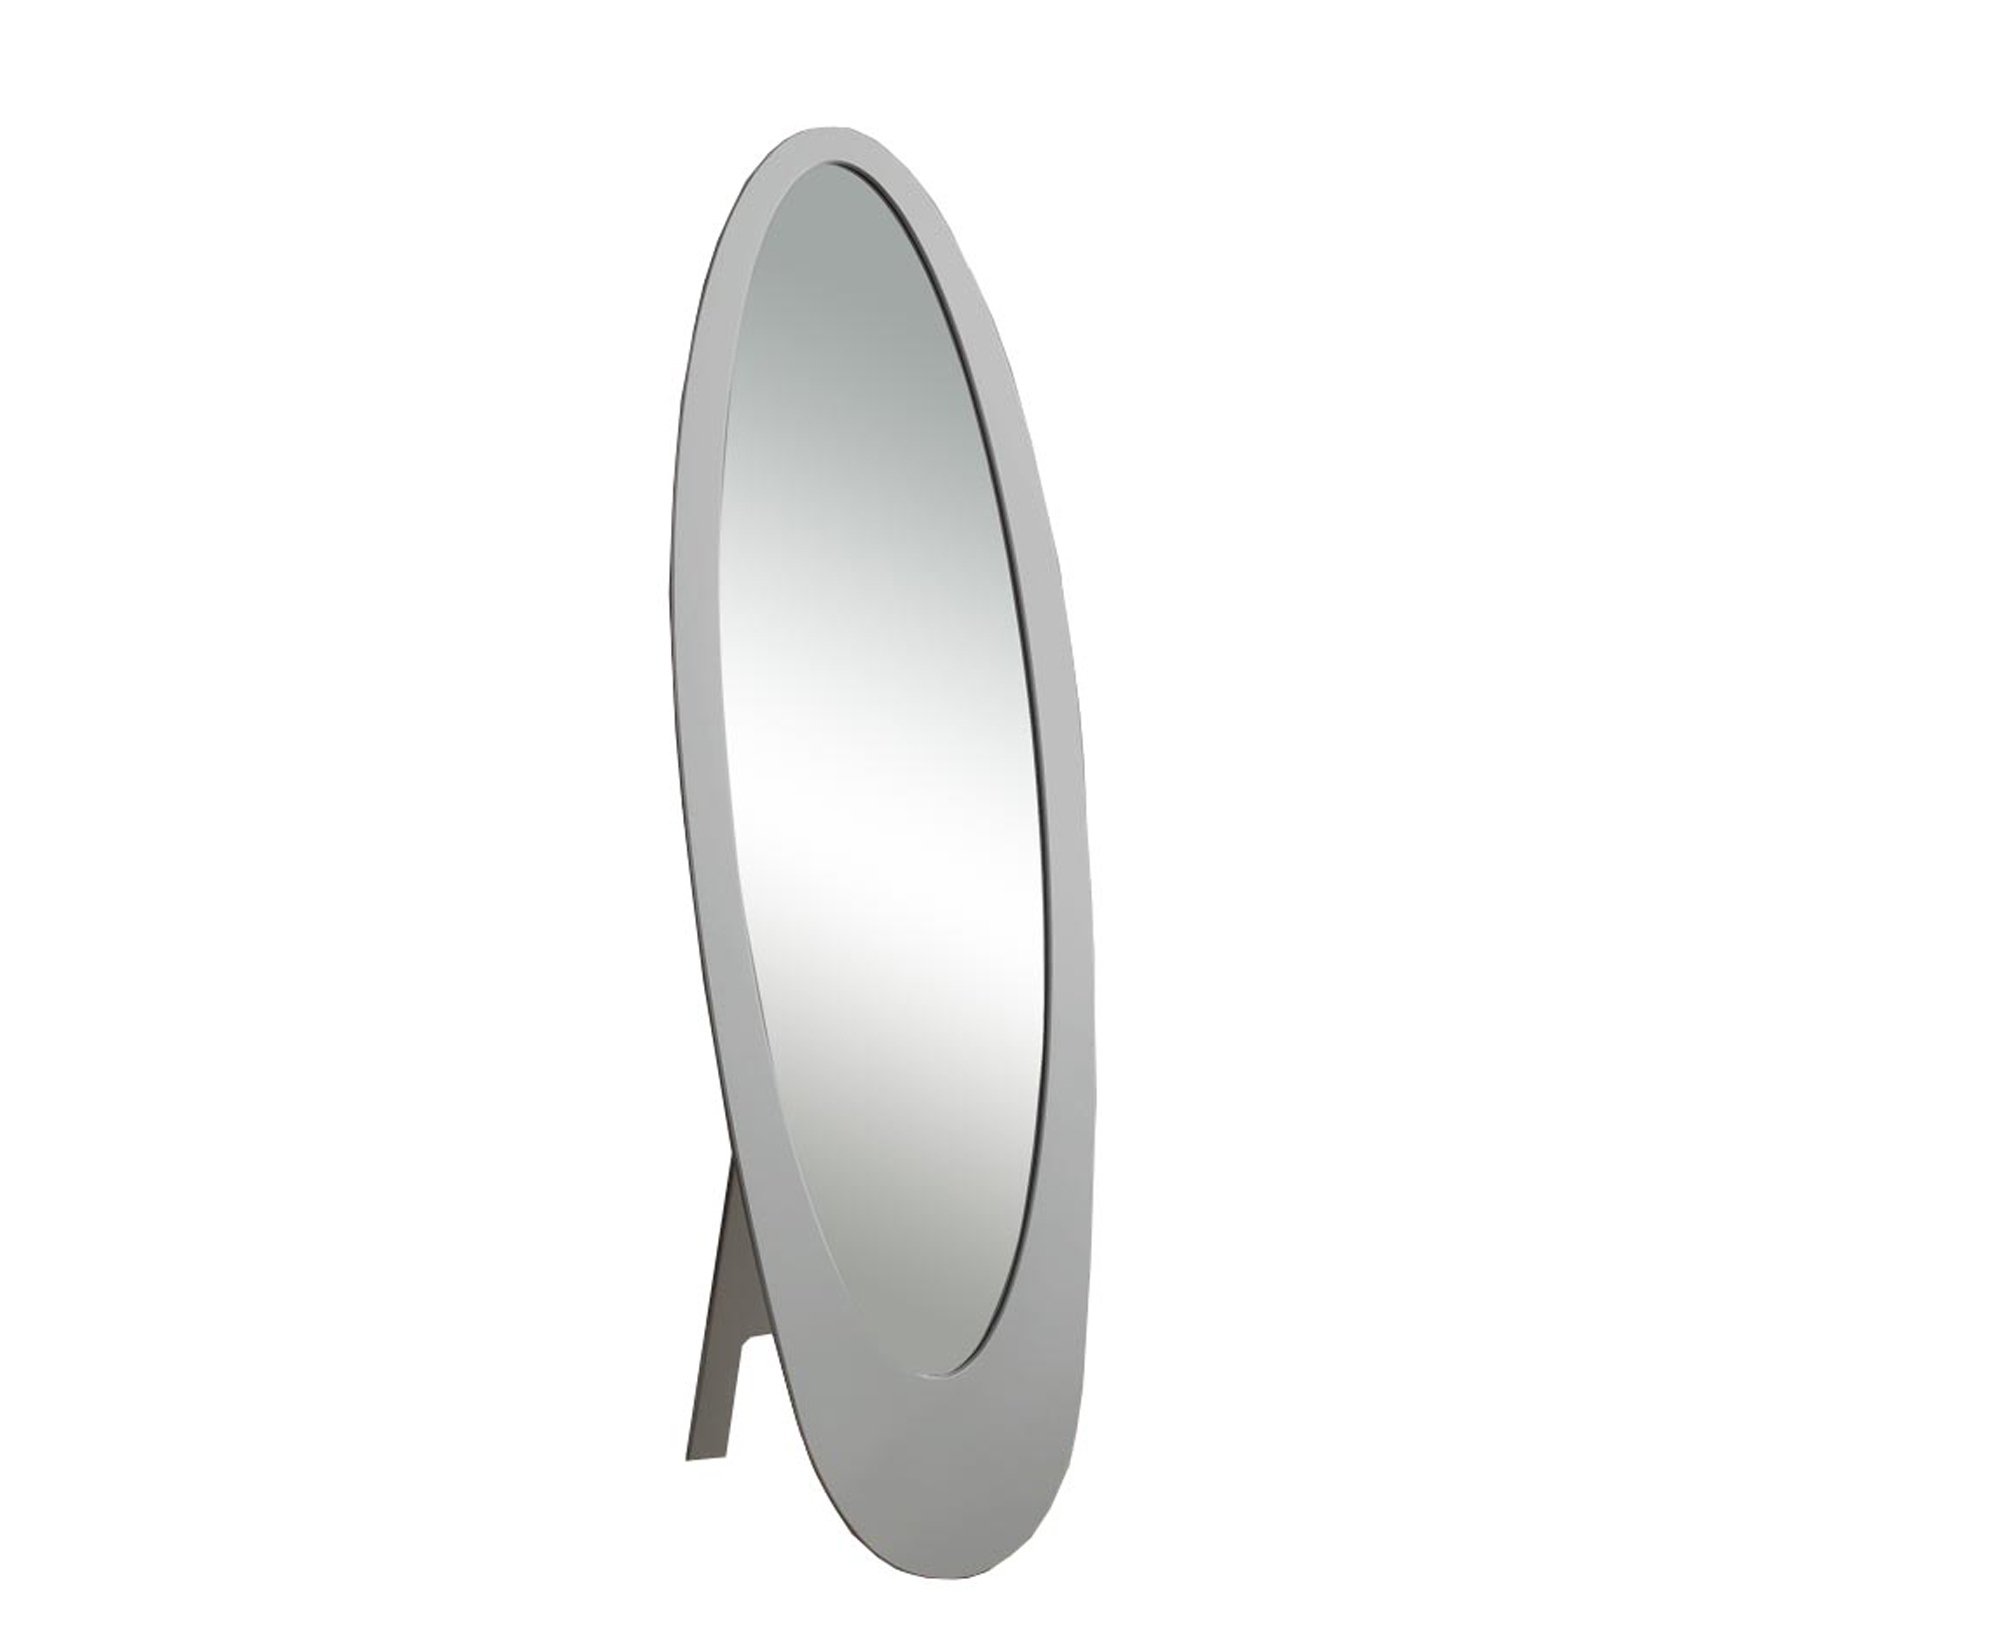 59" Contemporary Oval Shaped Cheval Mirror, Gray